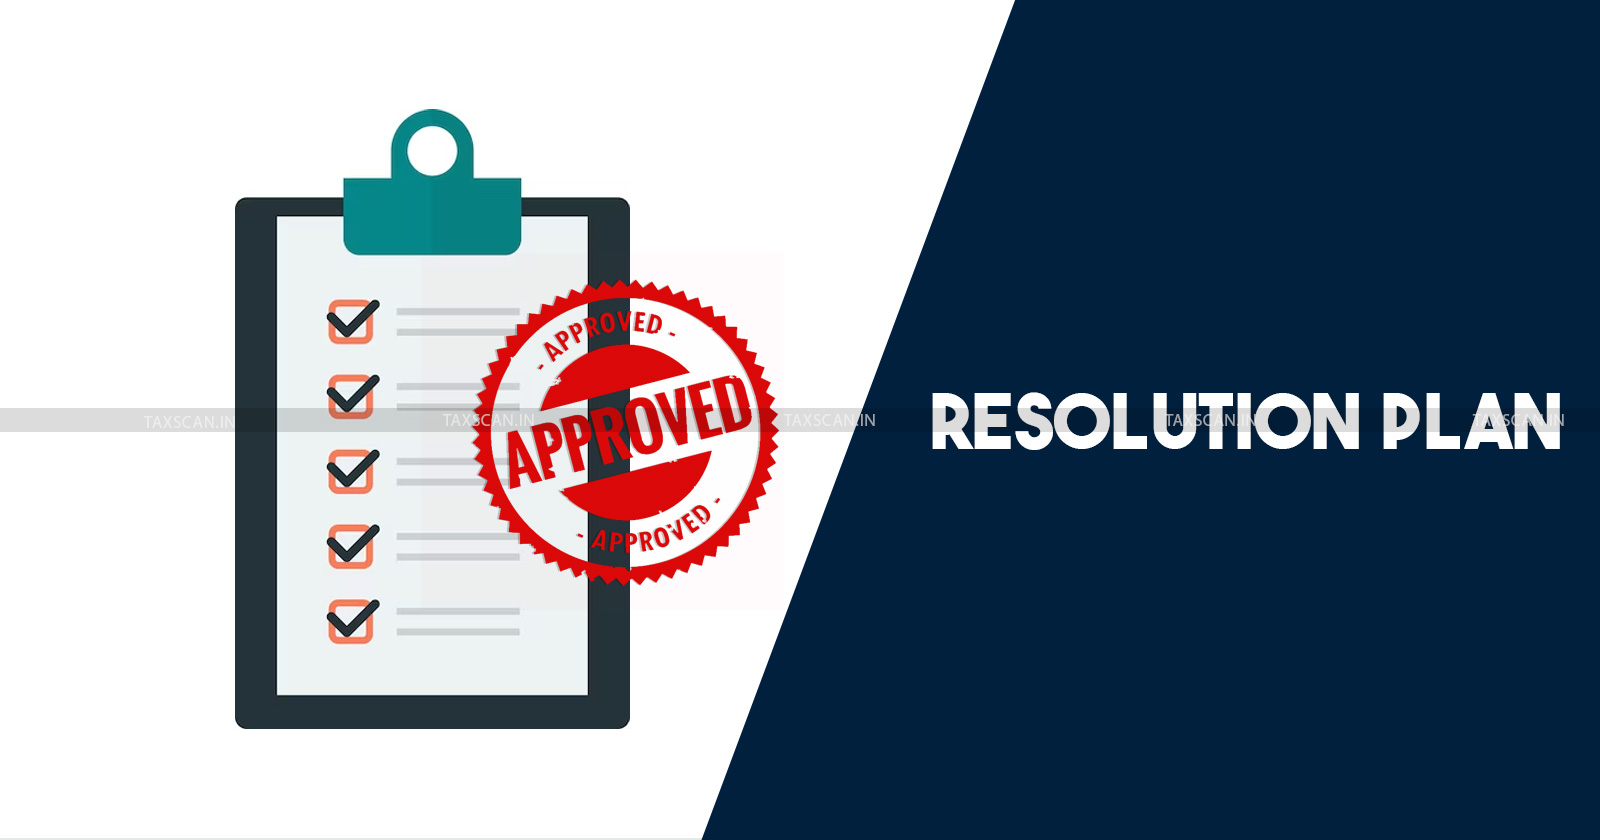 NCLAT - Resolution Plan - Committee of Creditors - NCLAT Delhi - Resolution plan approval - taxscan